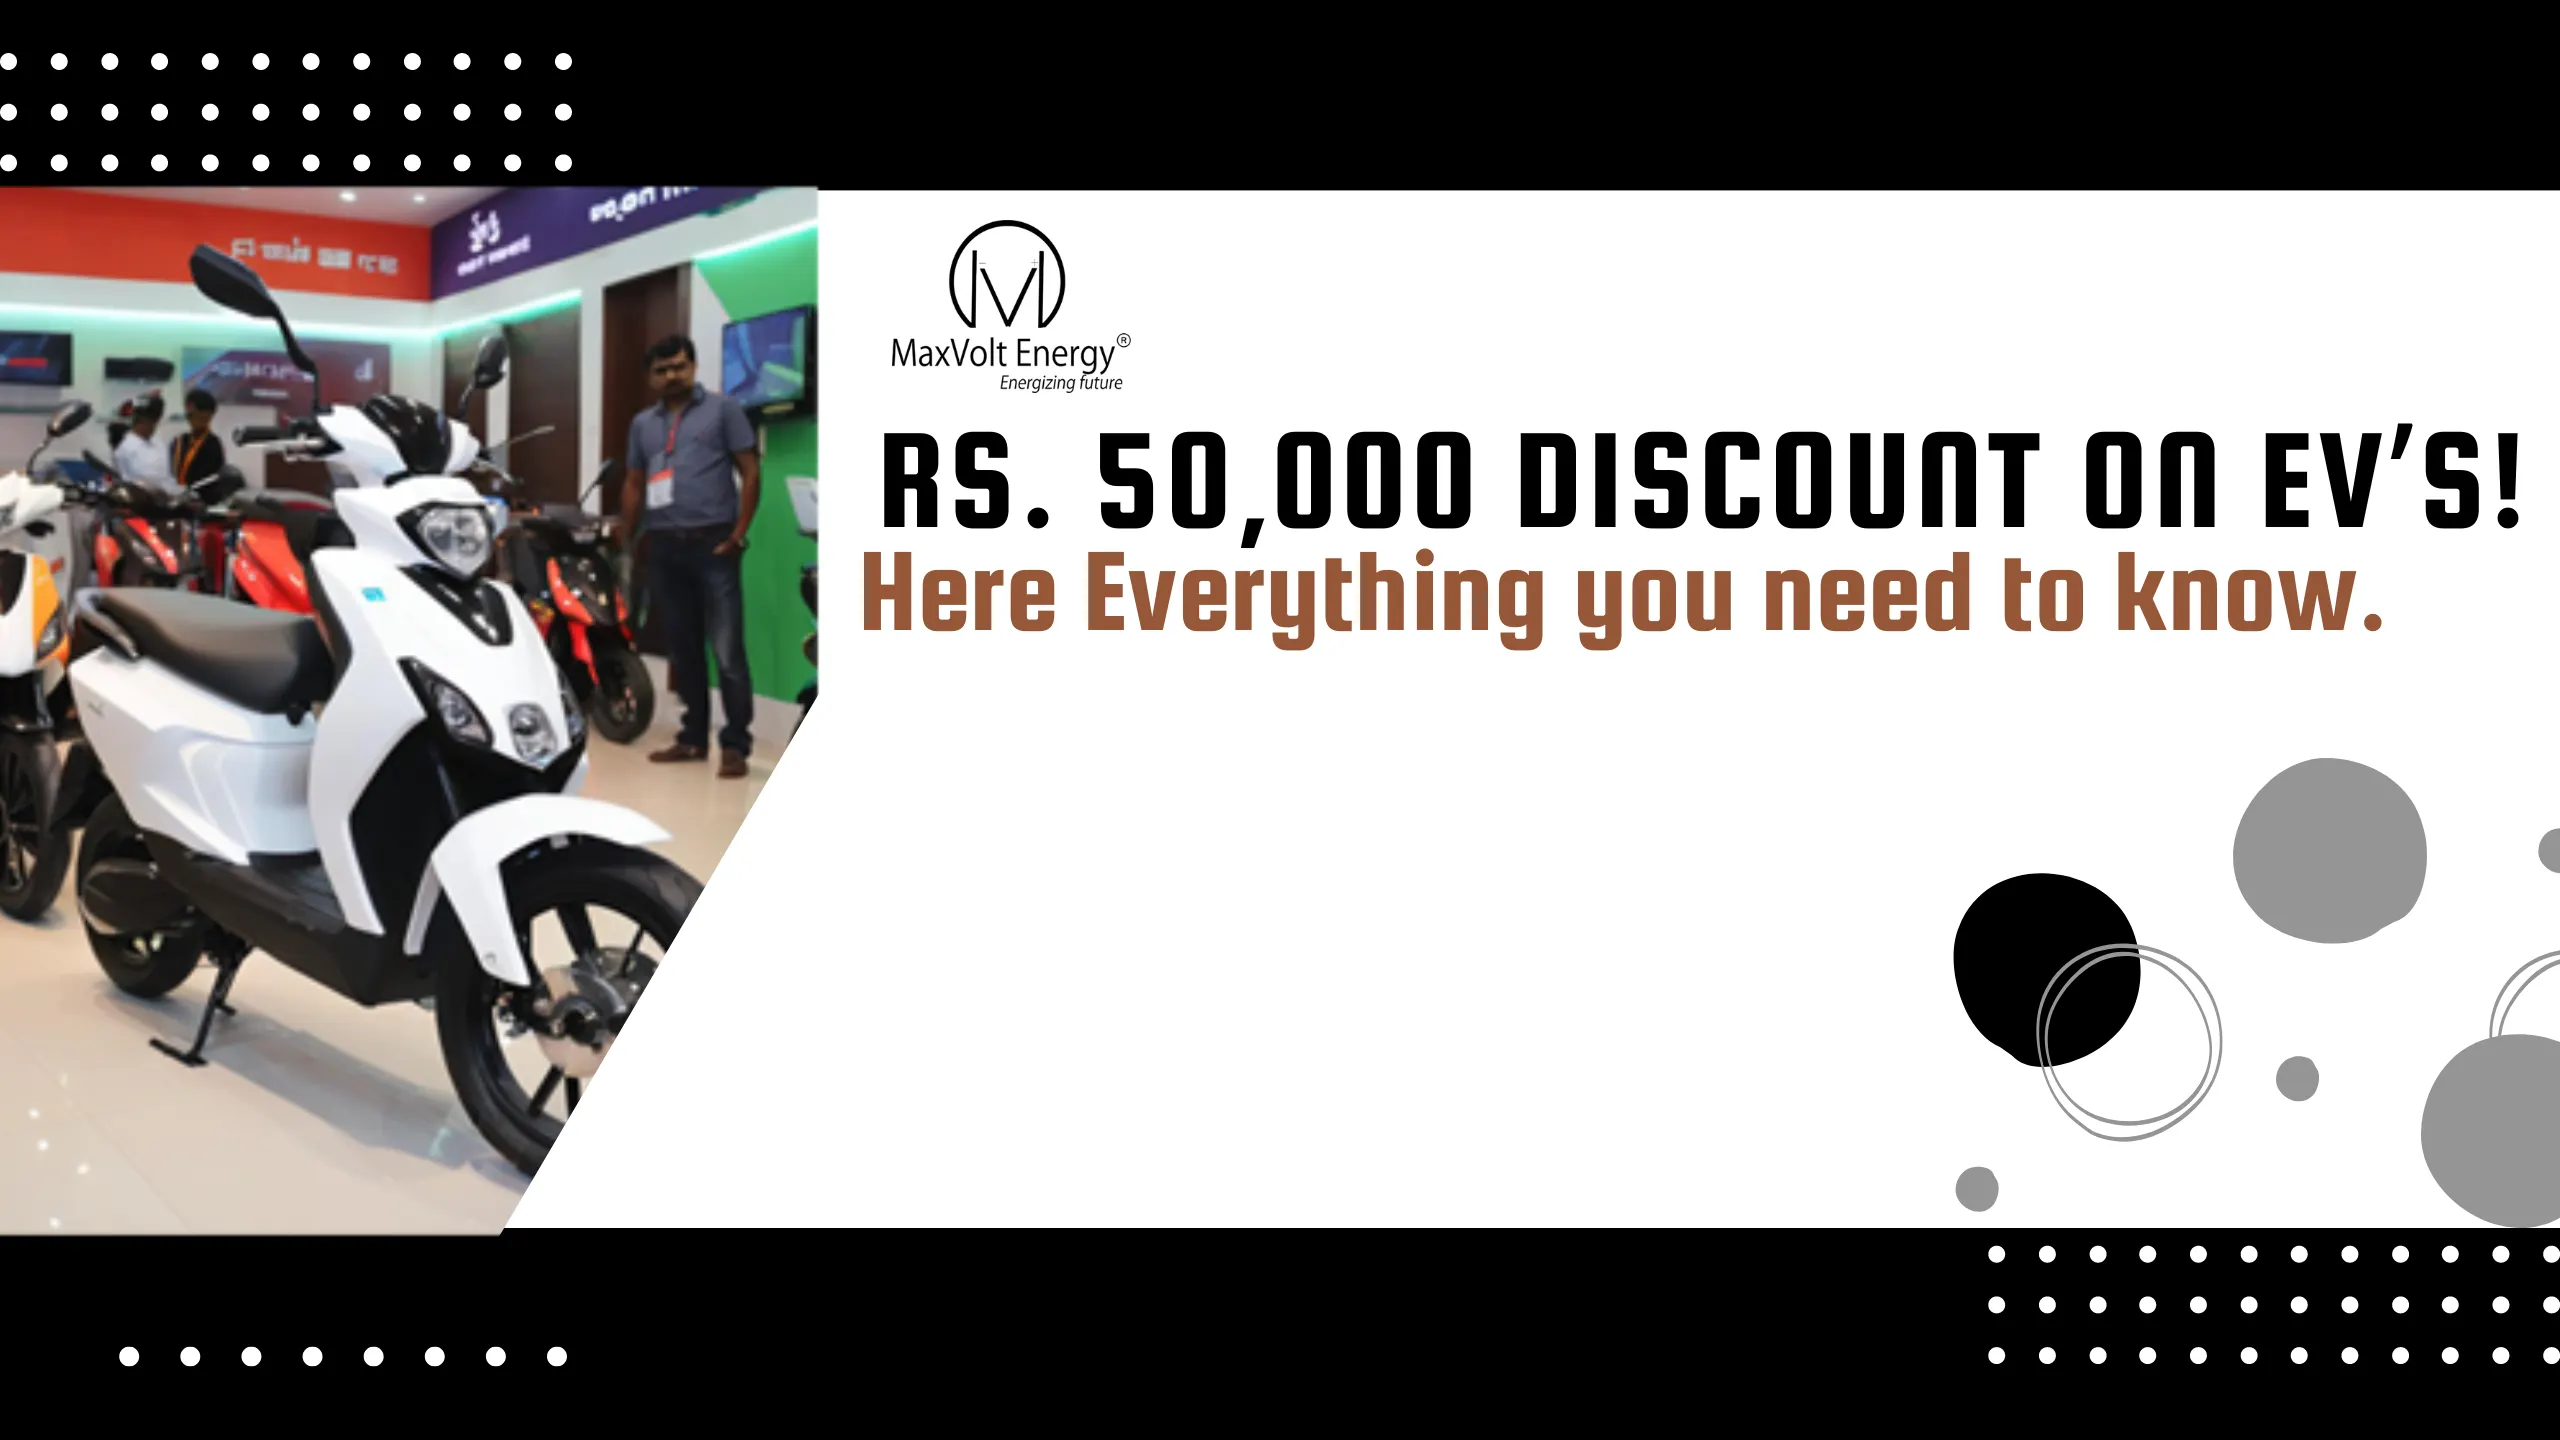 Rs. 50,000 Discount on EV’s! Here Everything you need to know.